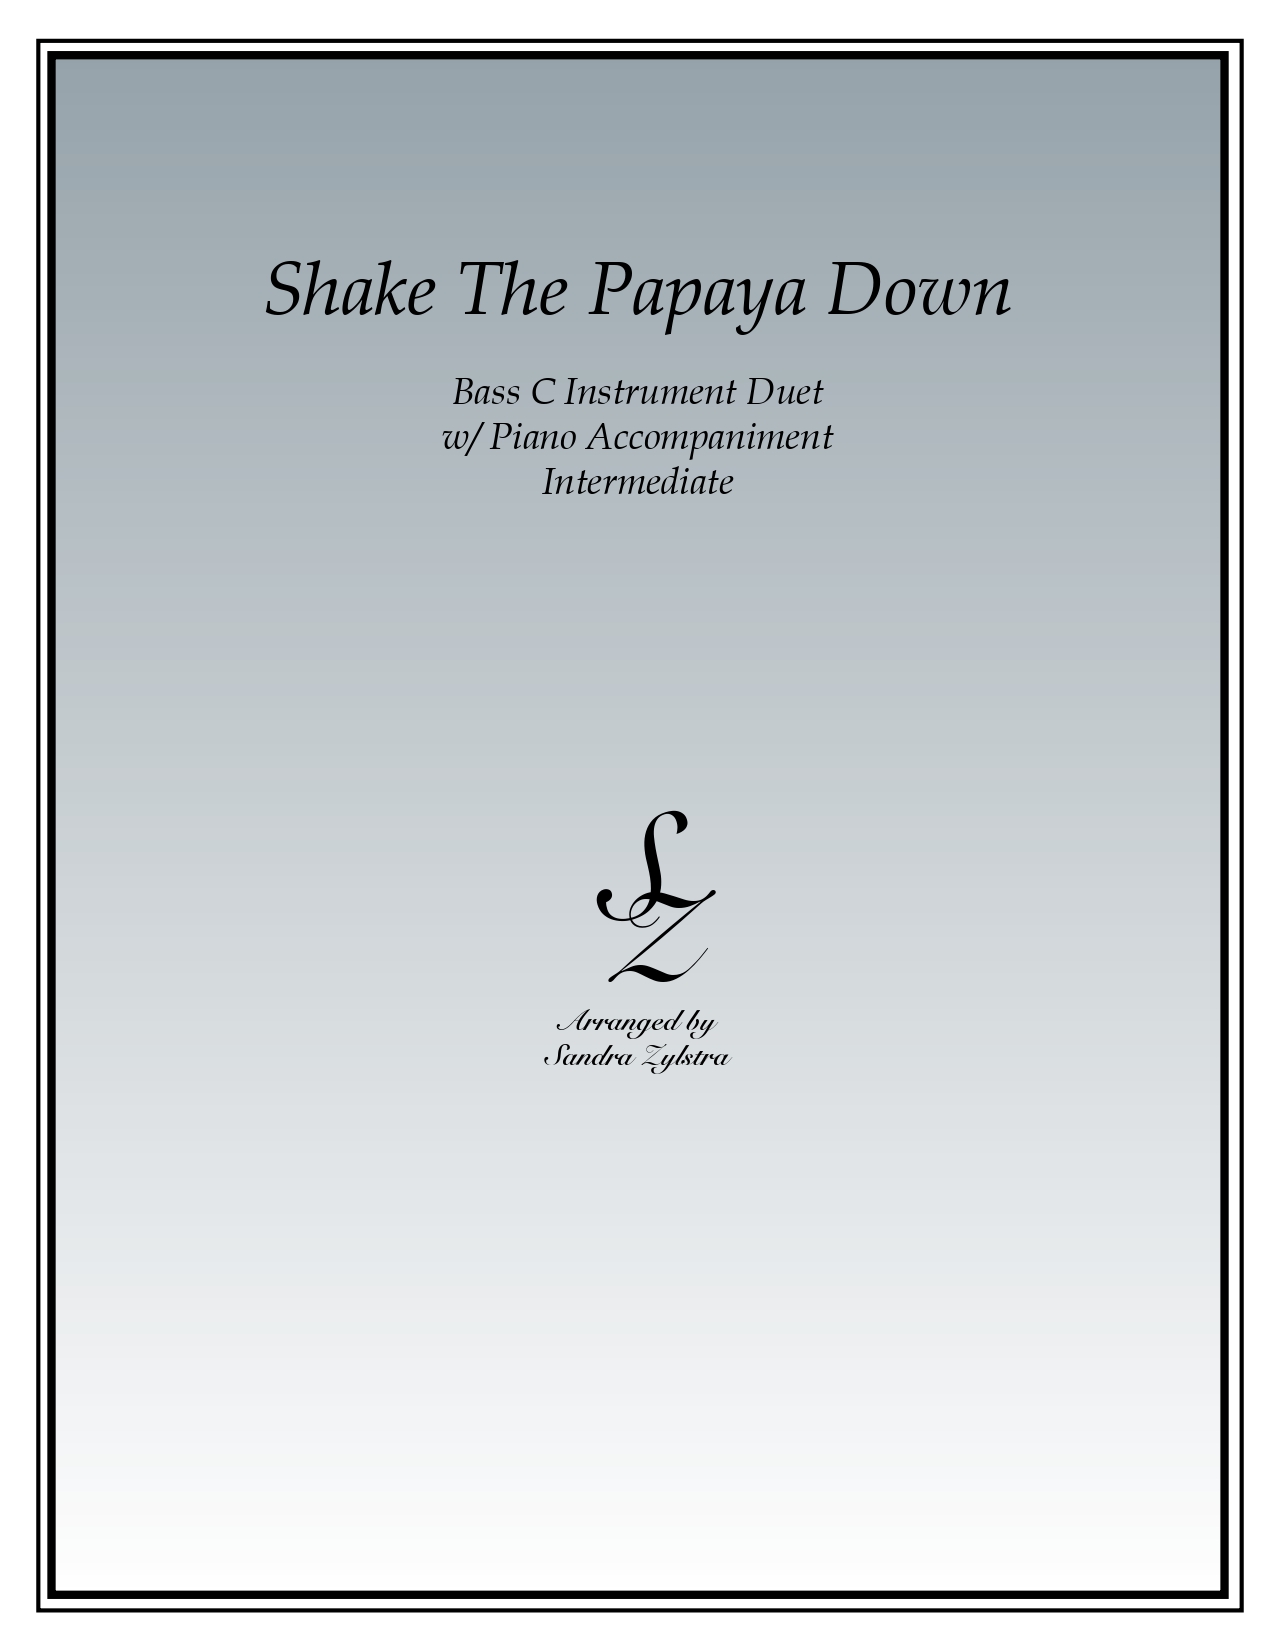 Shake The Papaya Down bass C instrument duet parts cover page 00011